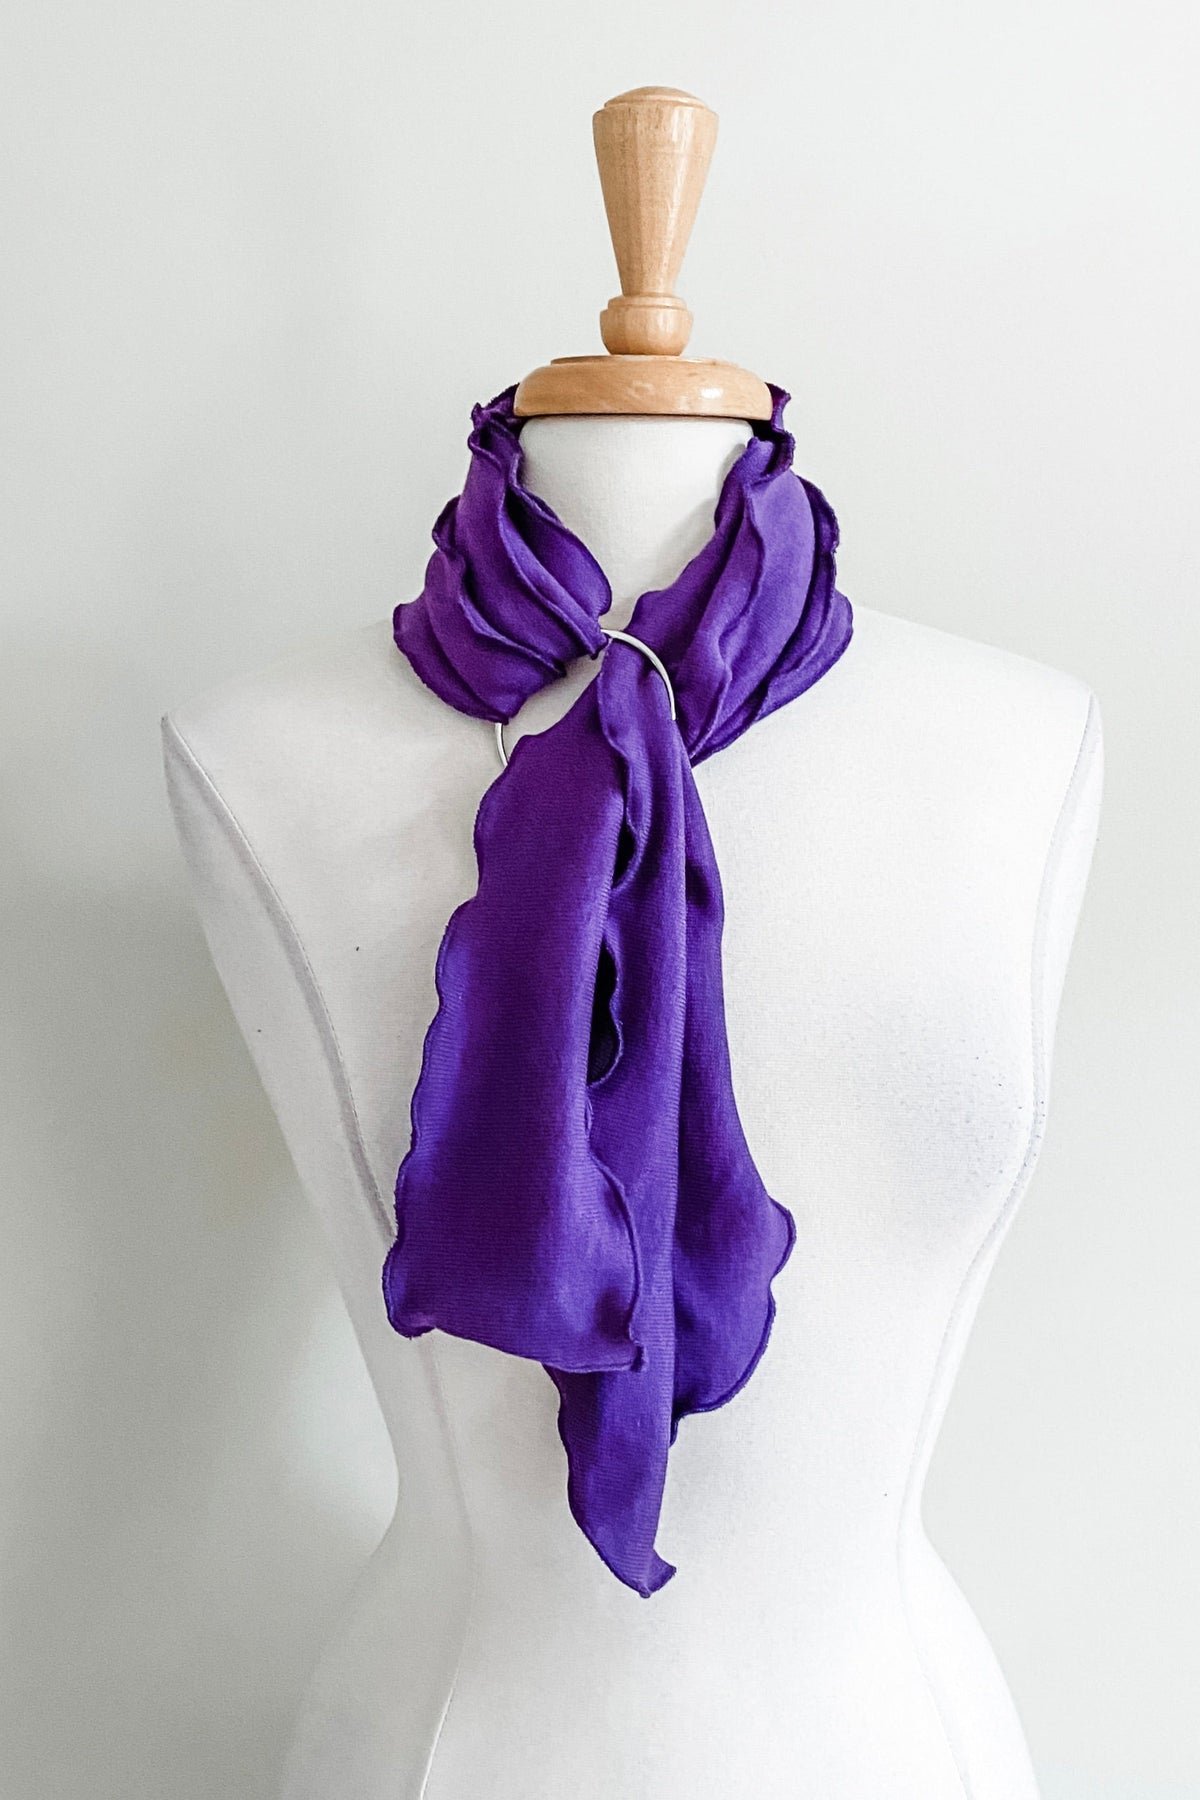 Matching Sash in Purple color from Diane Kroe